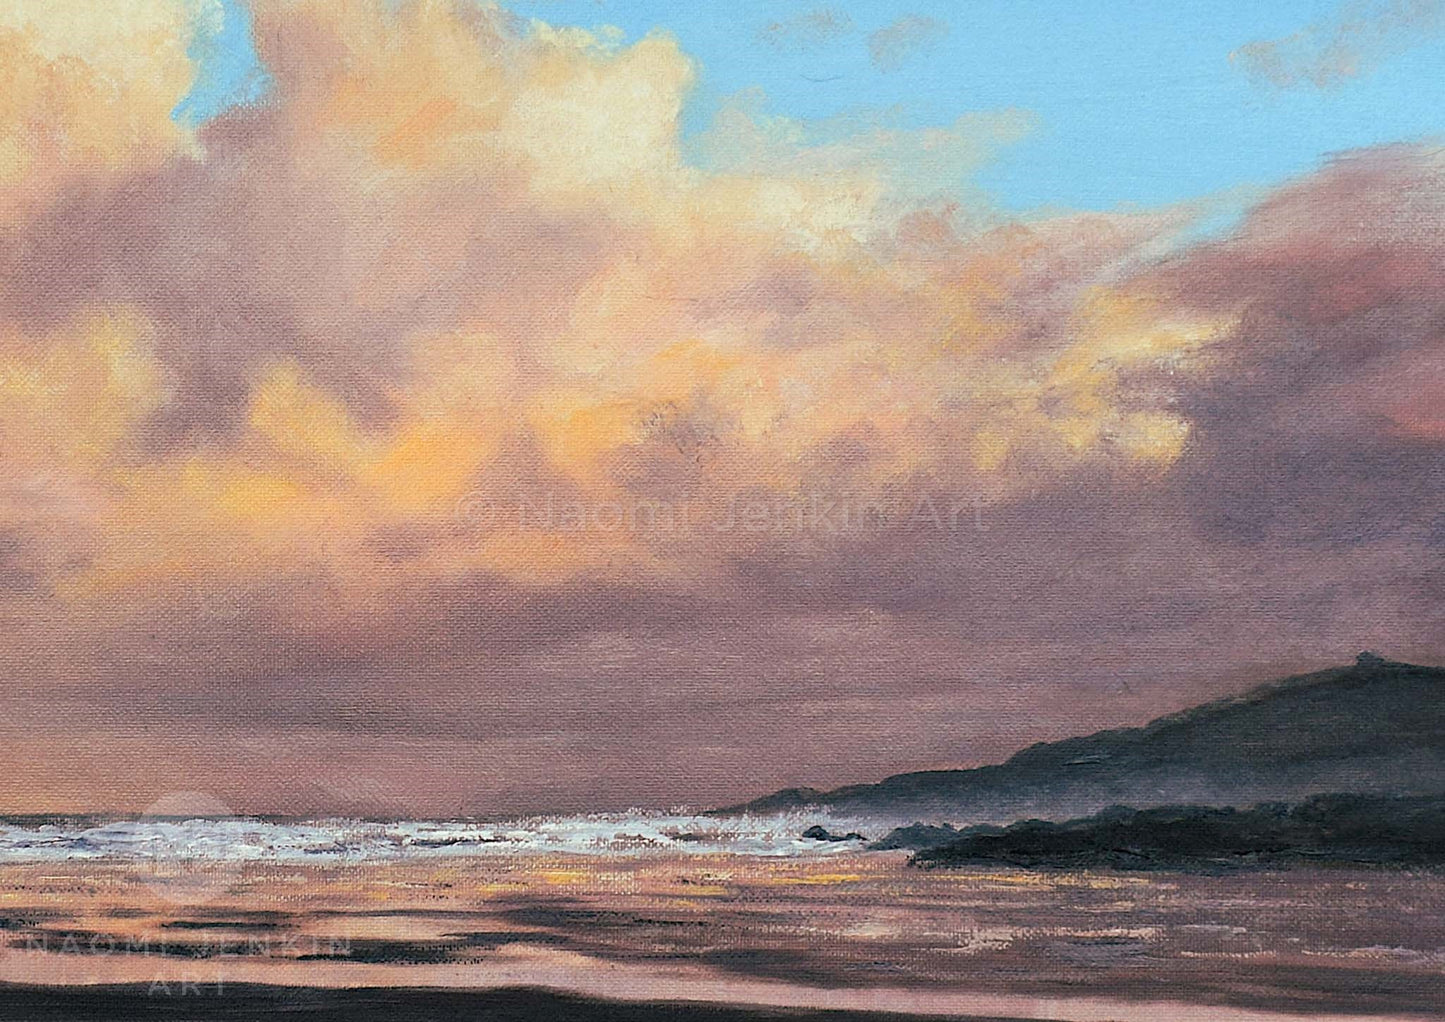 Close up beach scene from the original 'New Day Dawns' seascape painting by Naomi Jenkin Art